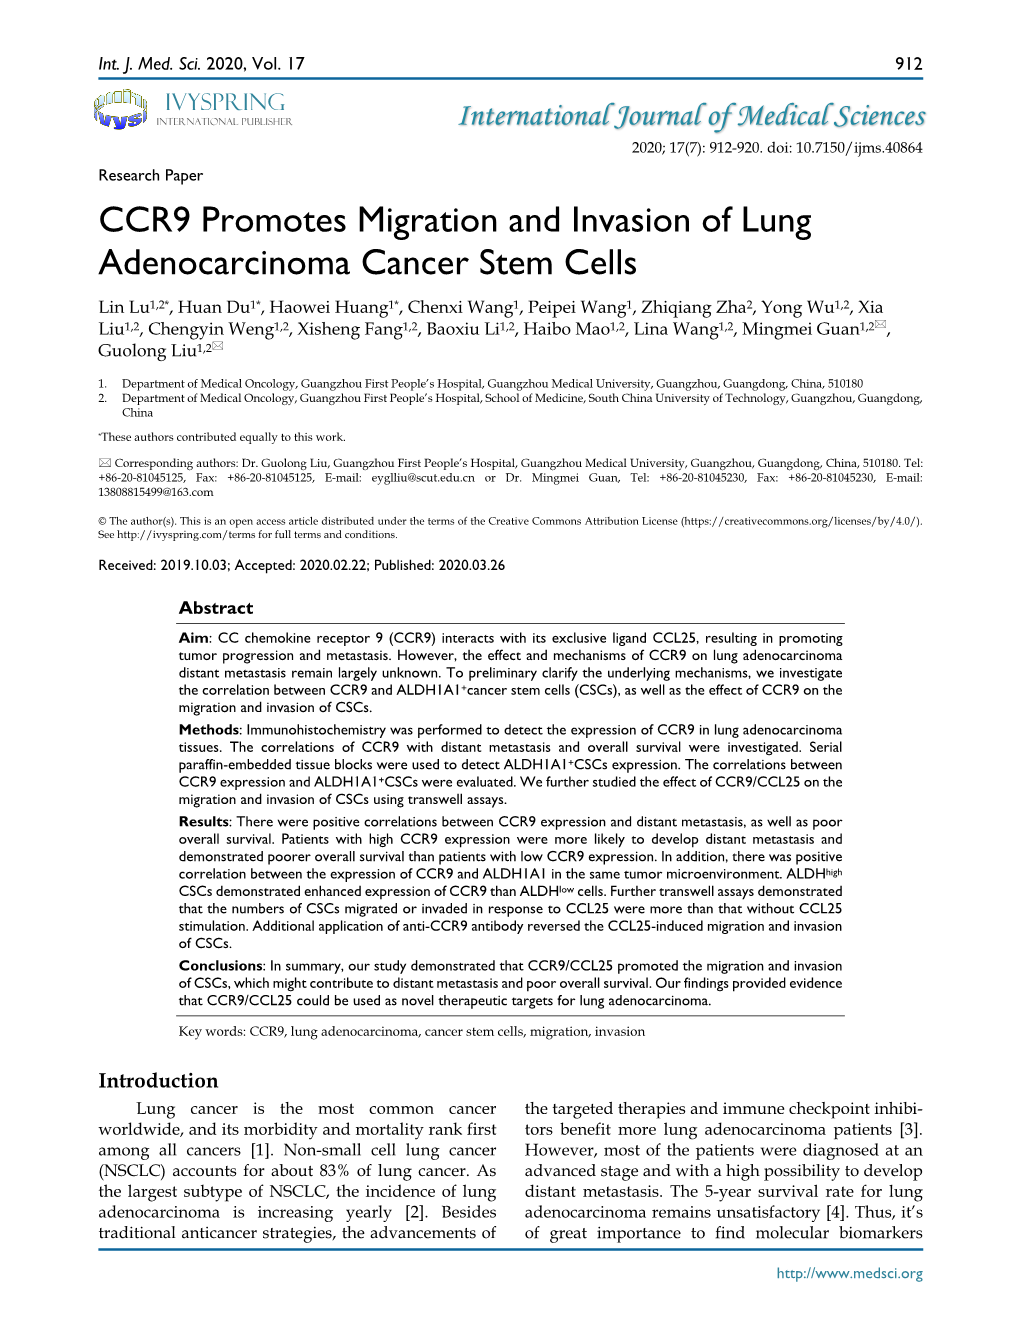 CCR9 Promotes Migration and Invasion of Lung Adenocarcinoma